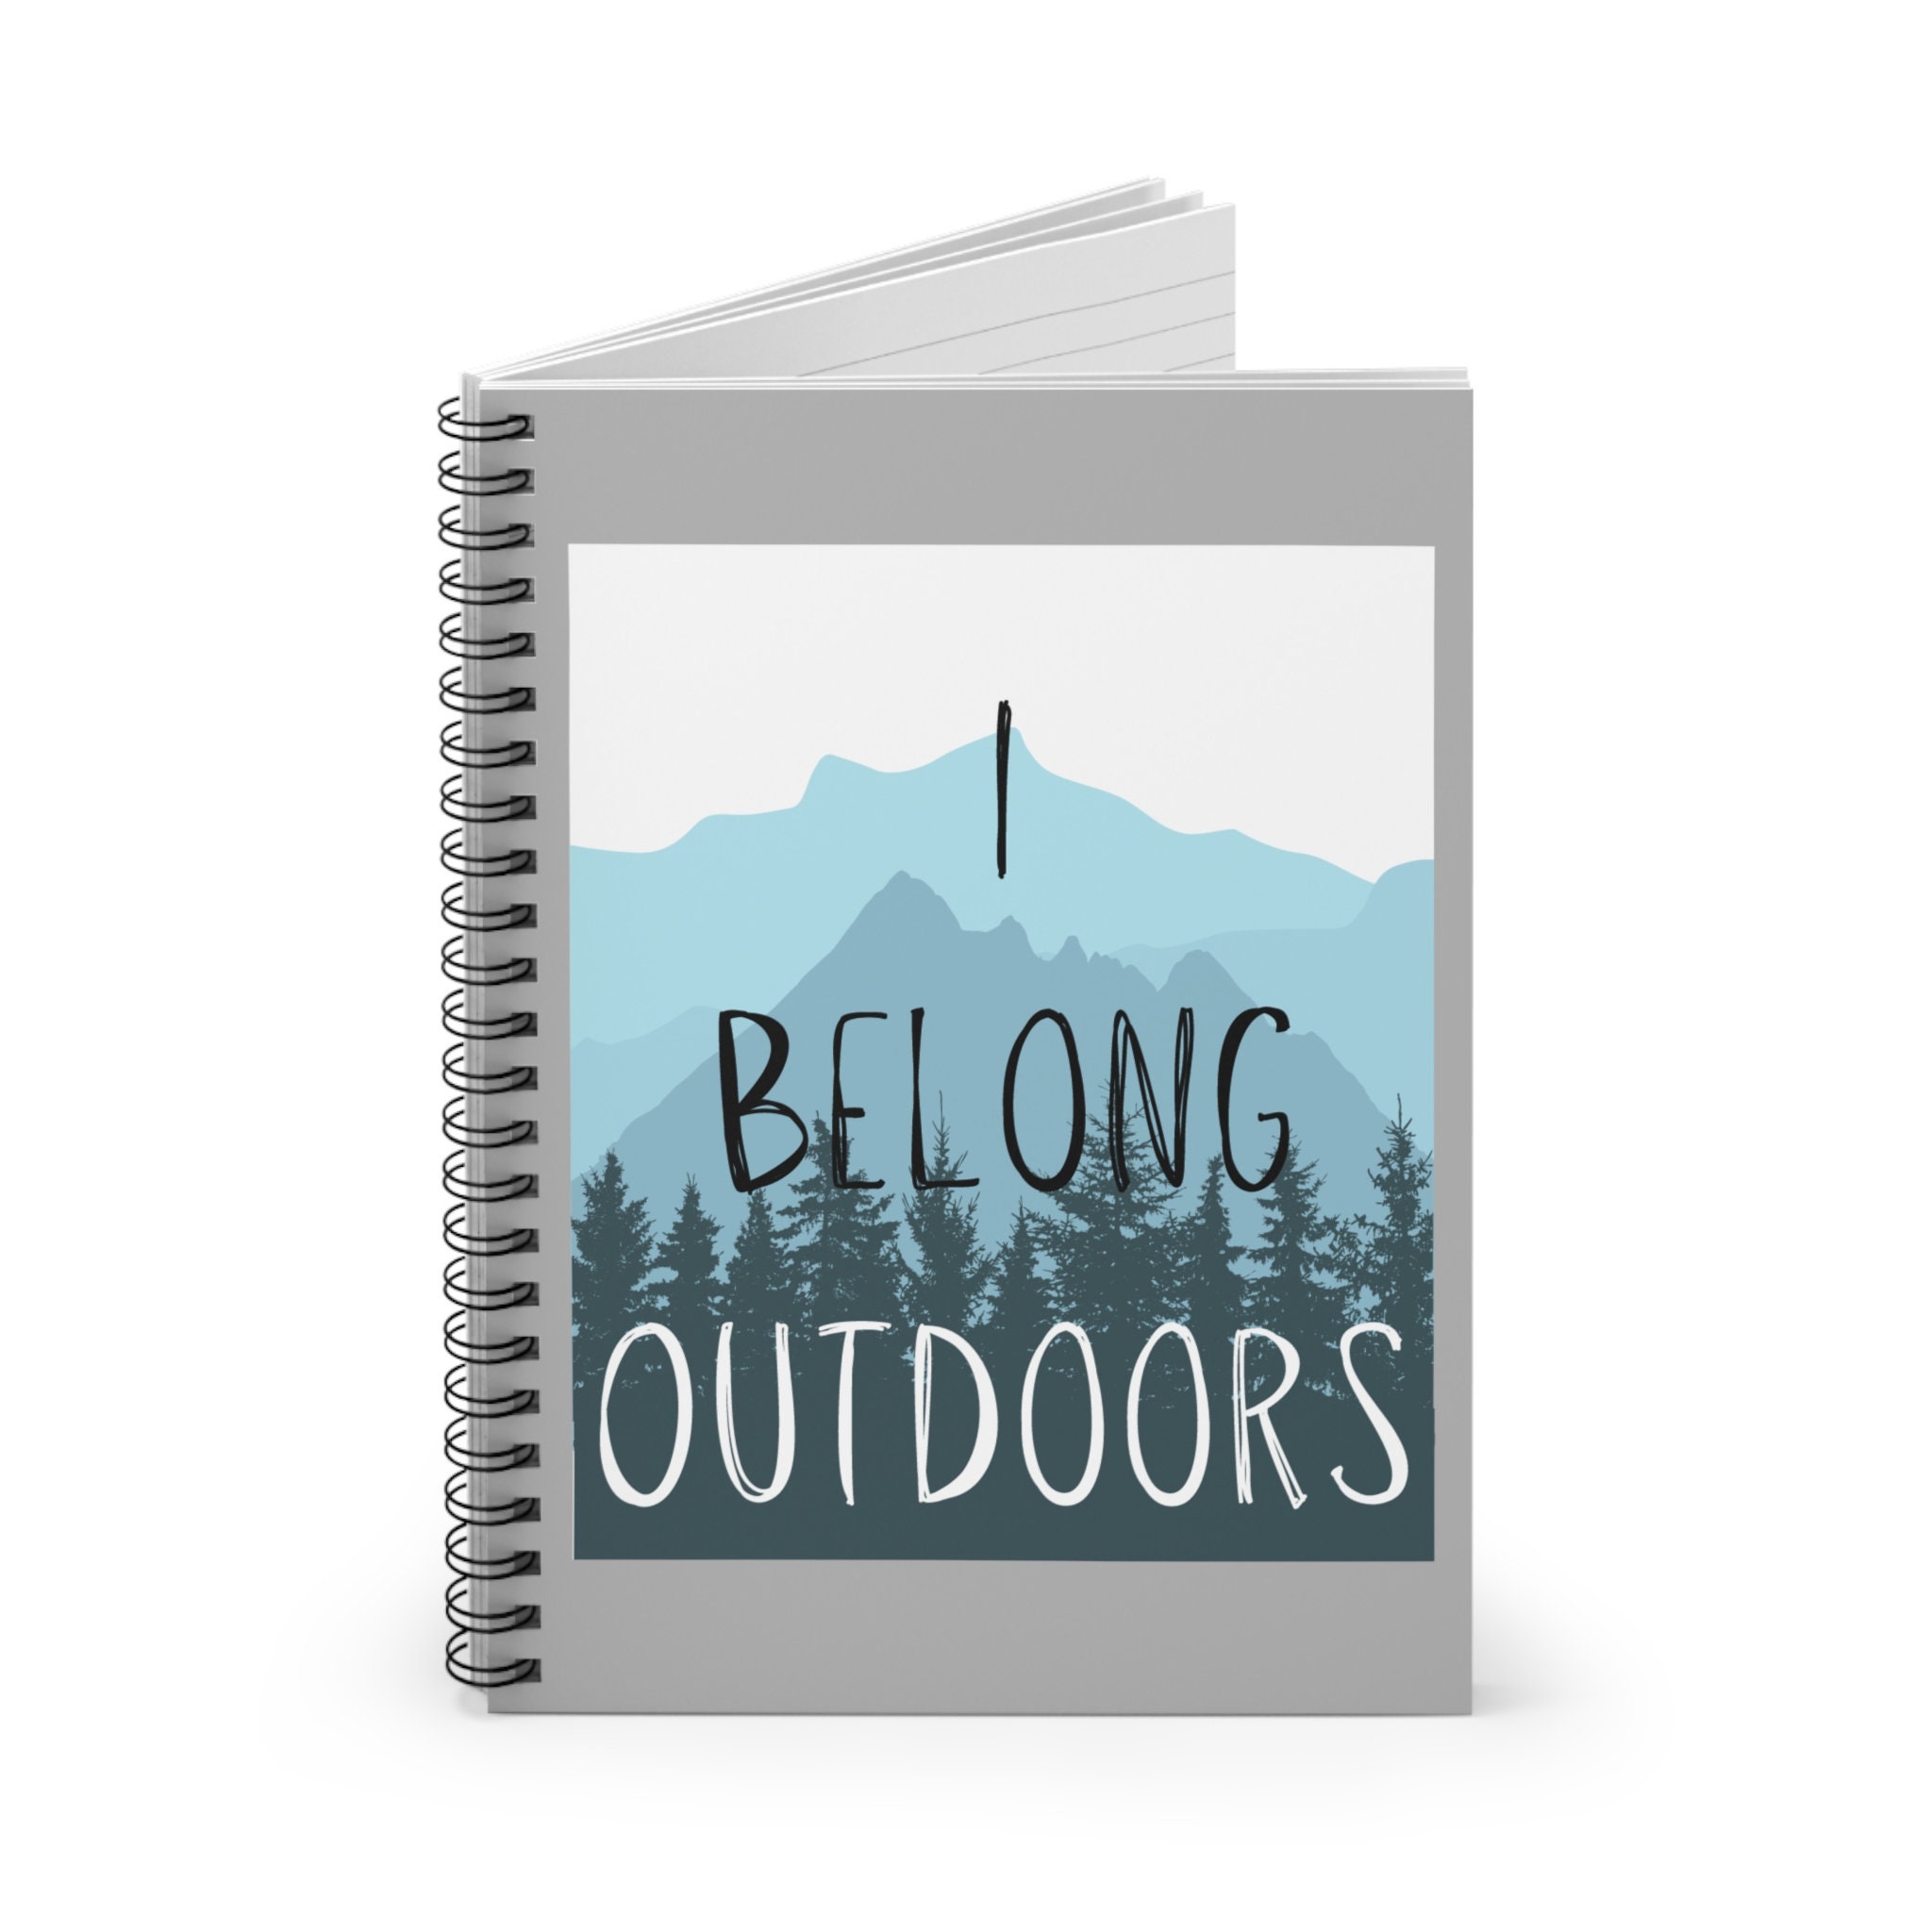 Outdoor Adventure Journal - Our Days Outside